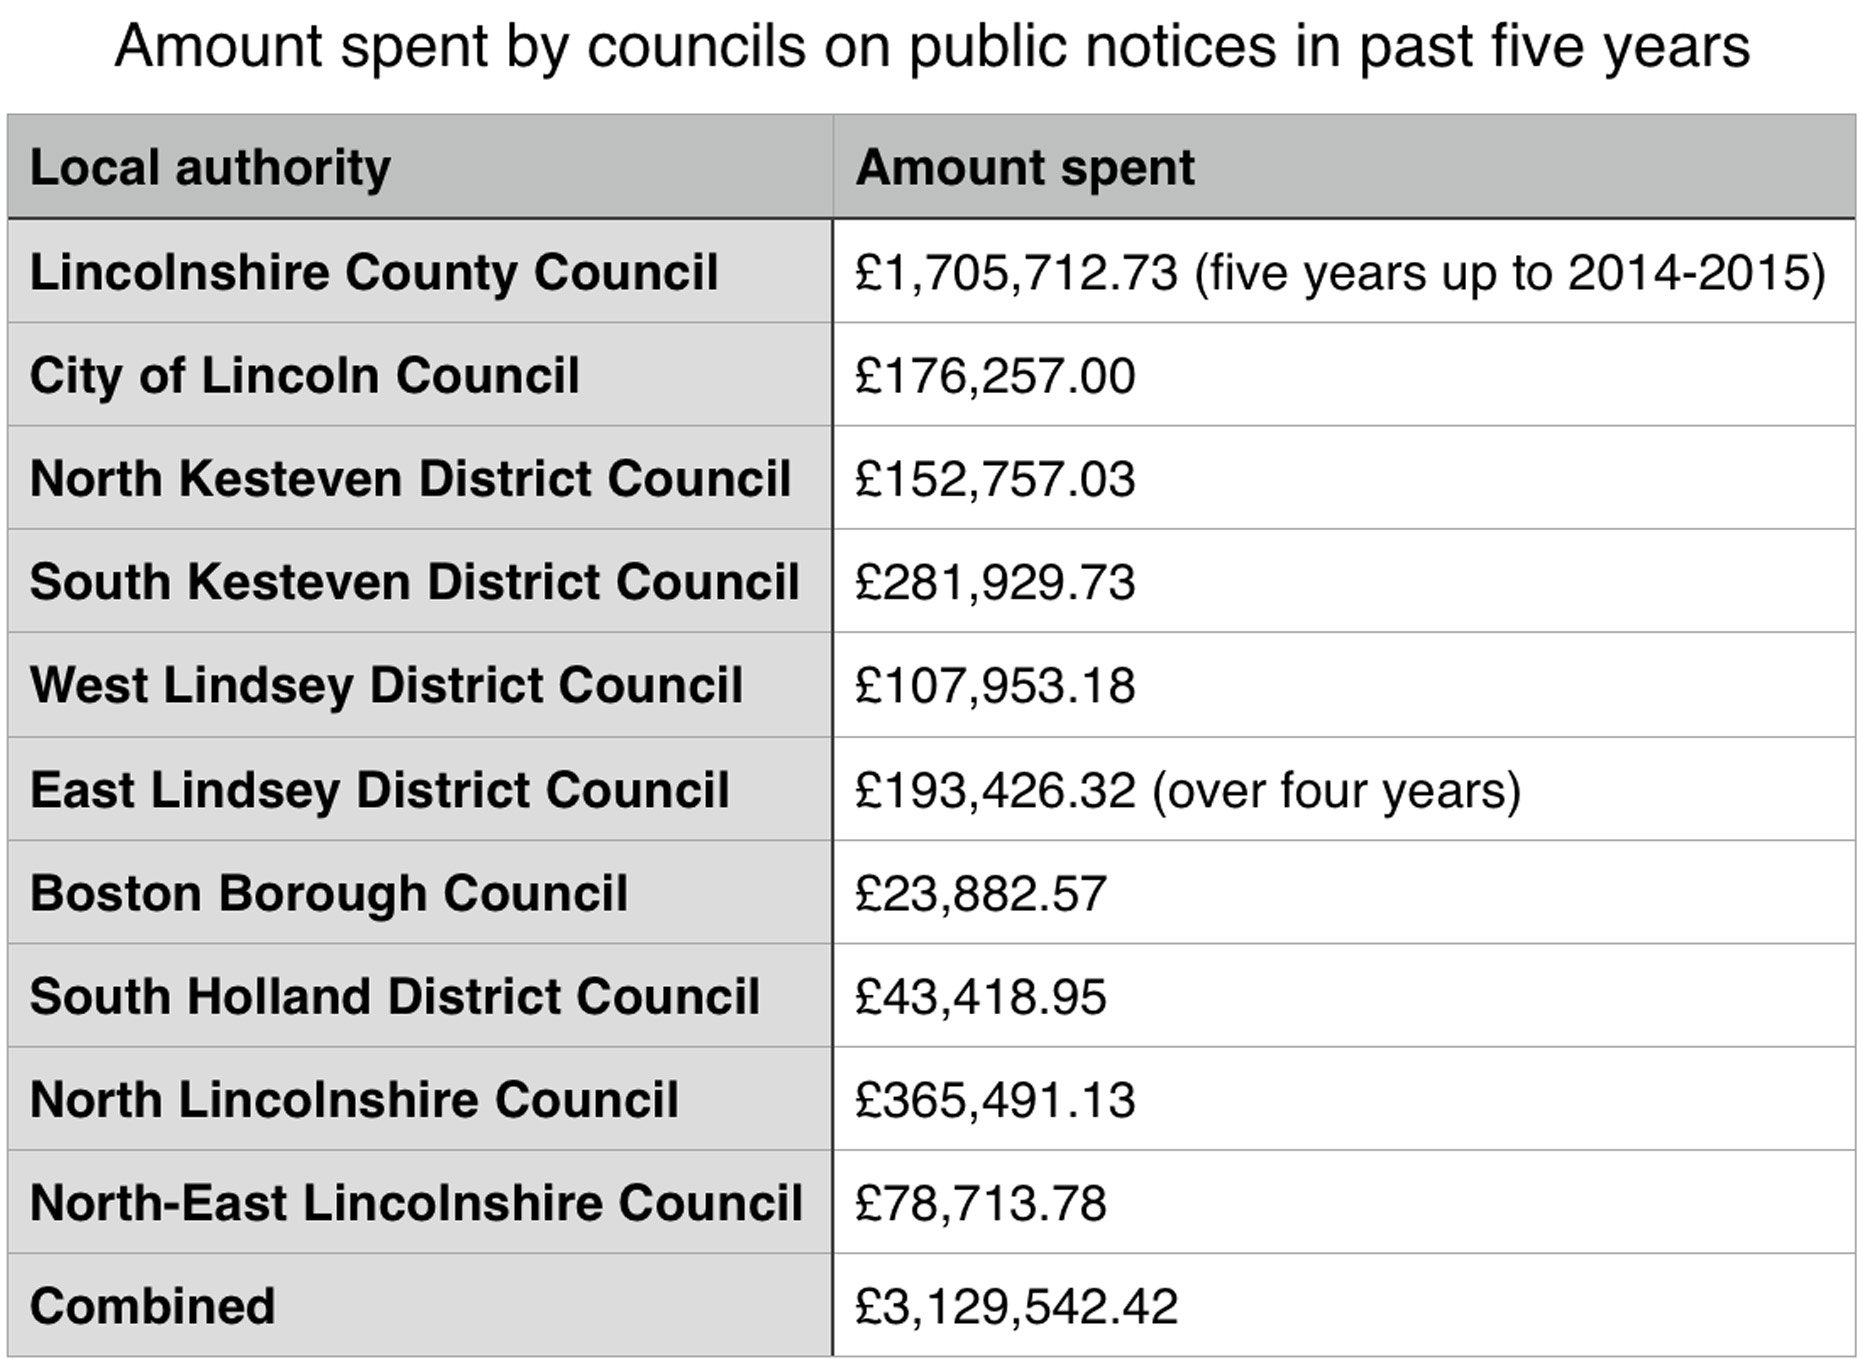 The amount spent by the 10 Lincolnshire councils on public notices over the past five years